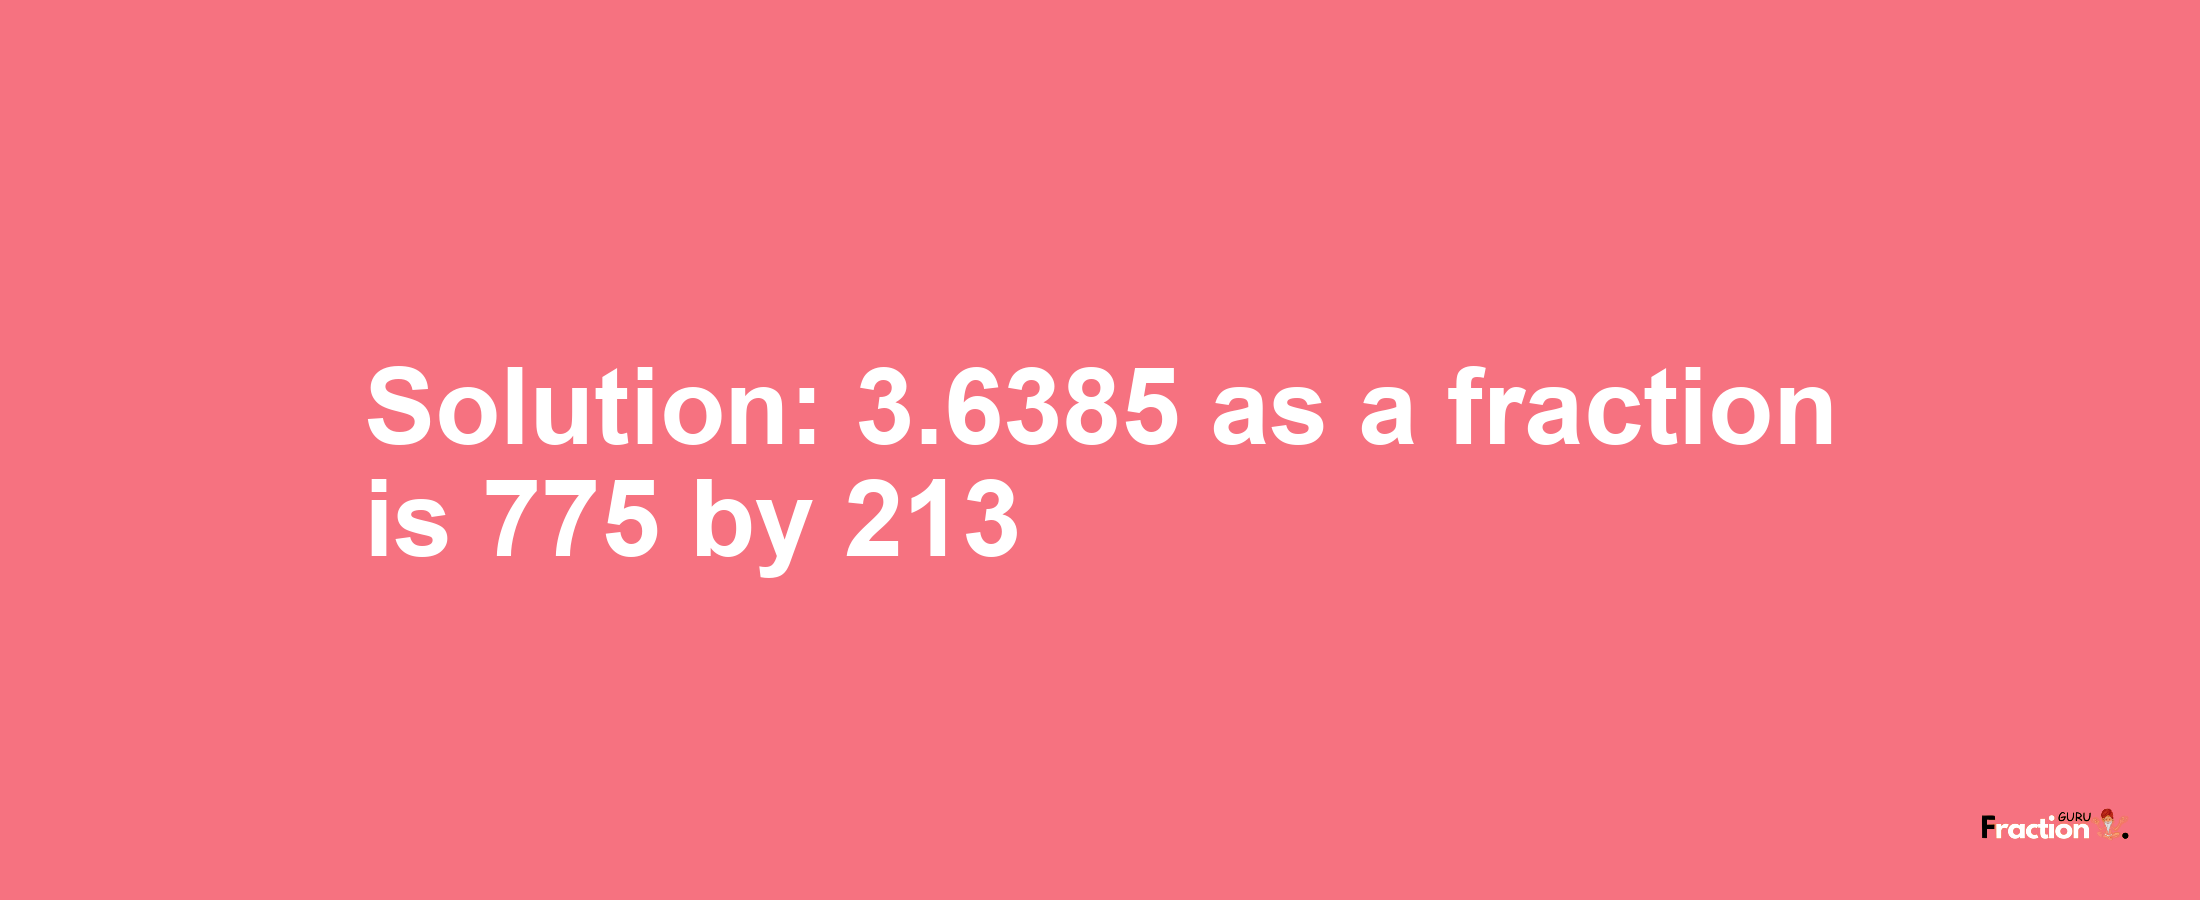 Solution:3.6385 as a fraction is 775/213